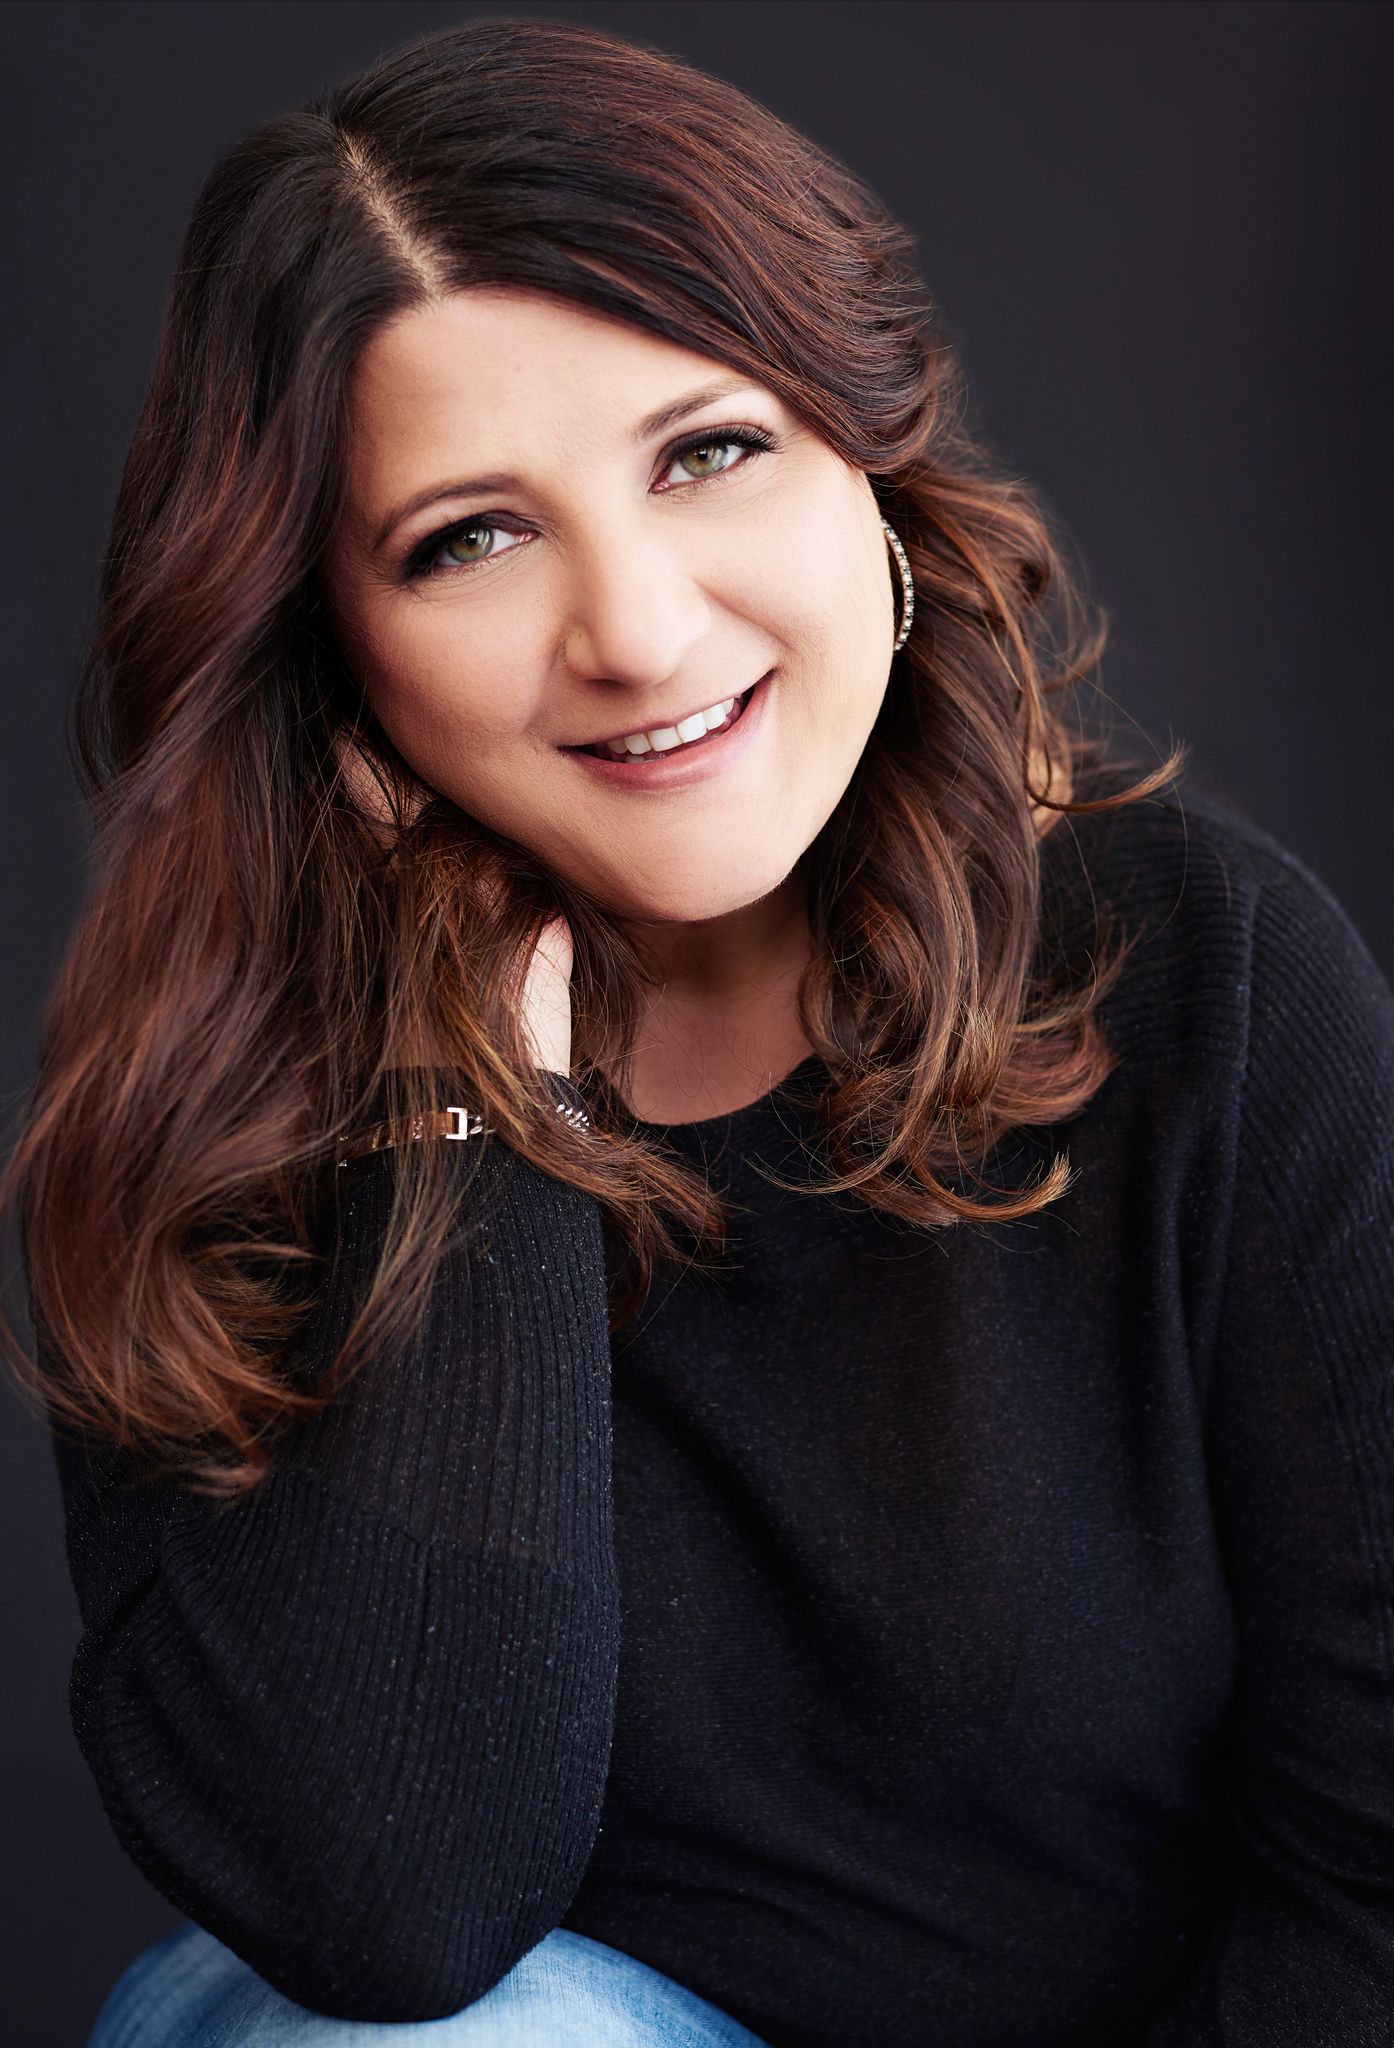 Beautiful smiling white woman with short brunette hair wearing a black sweater and jeans. Professional headshot and glamour shot.